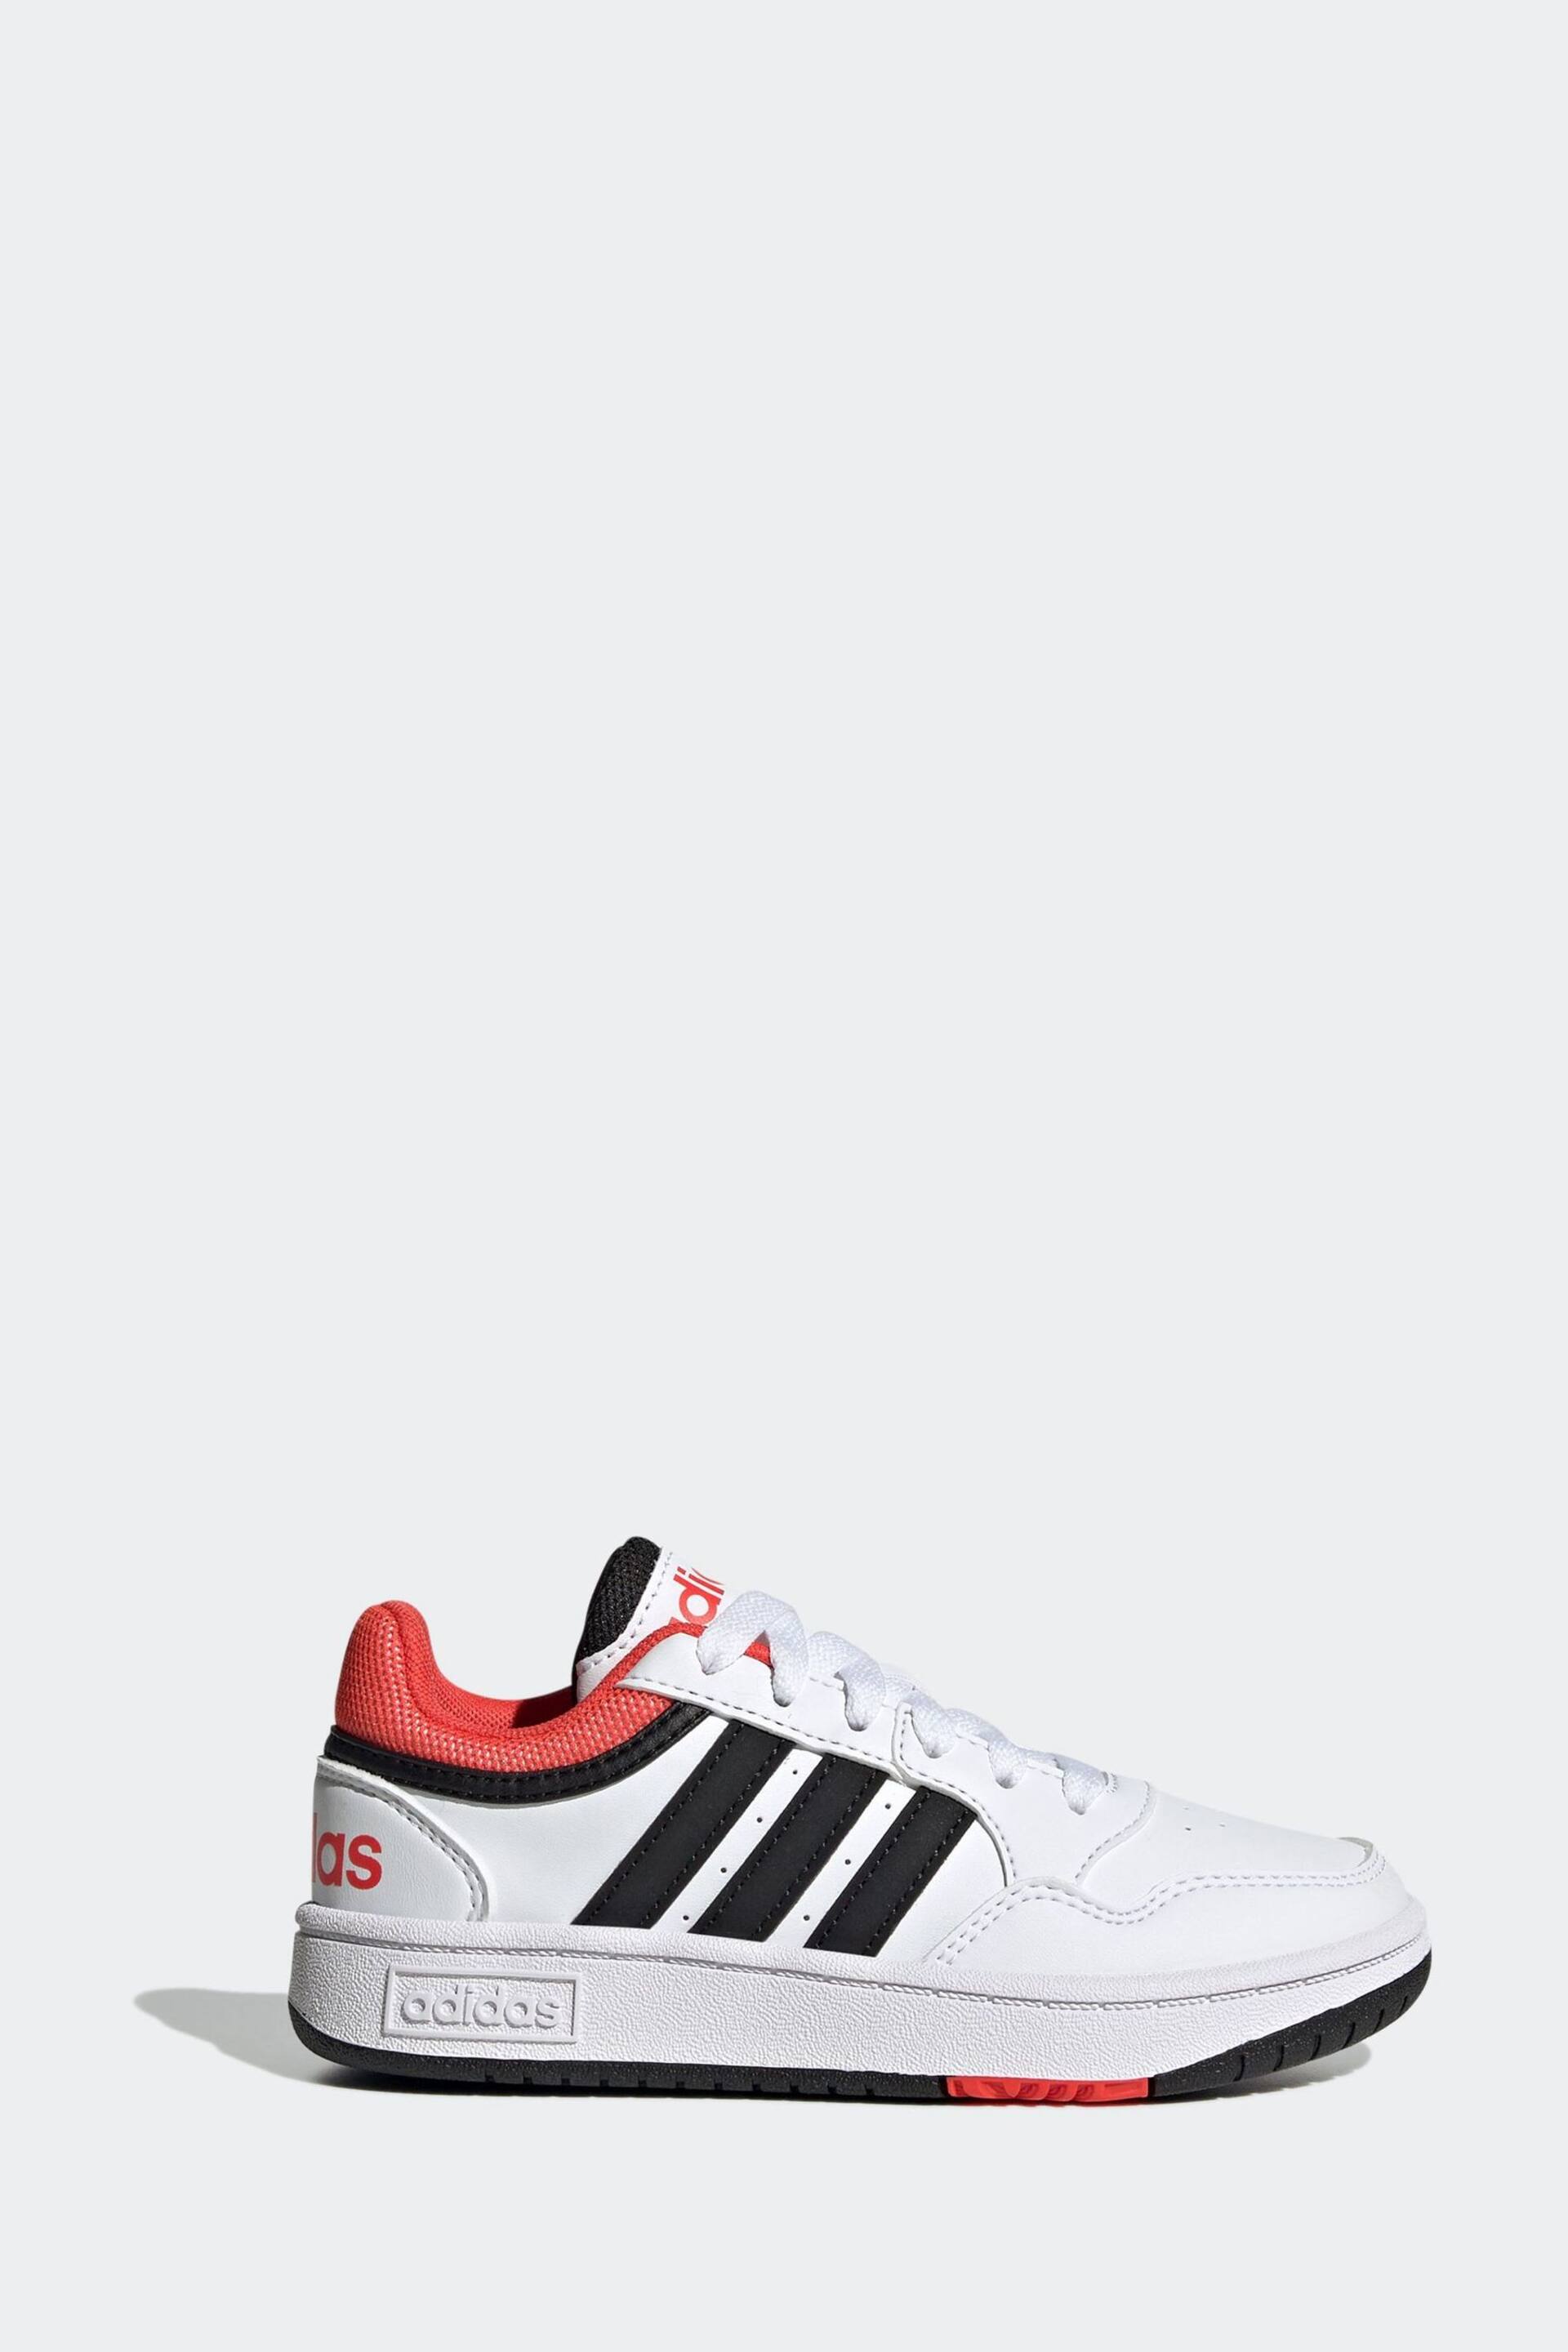 adidas White Hoops Trainers - Image 1 of 9